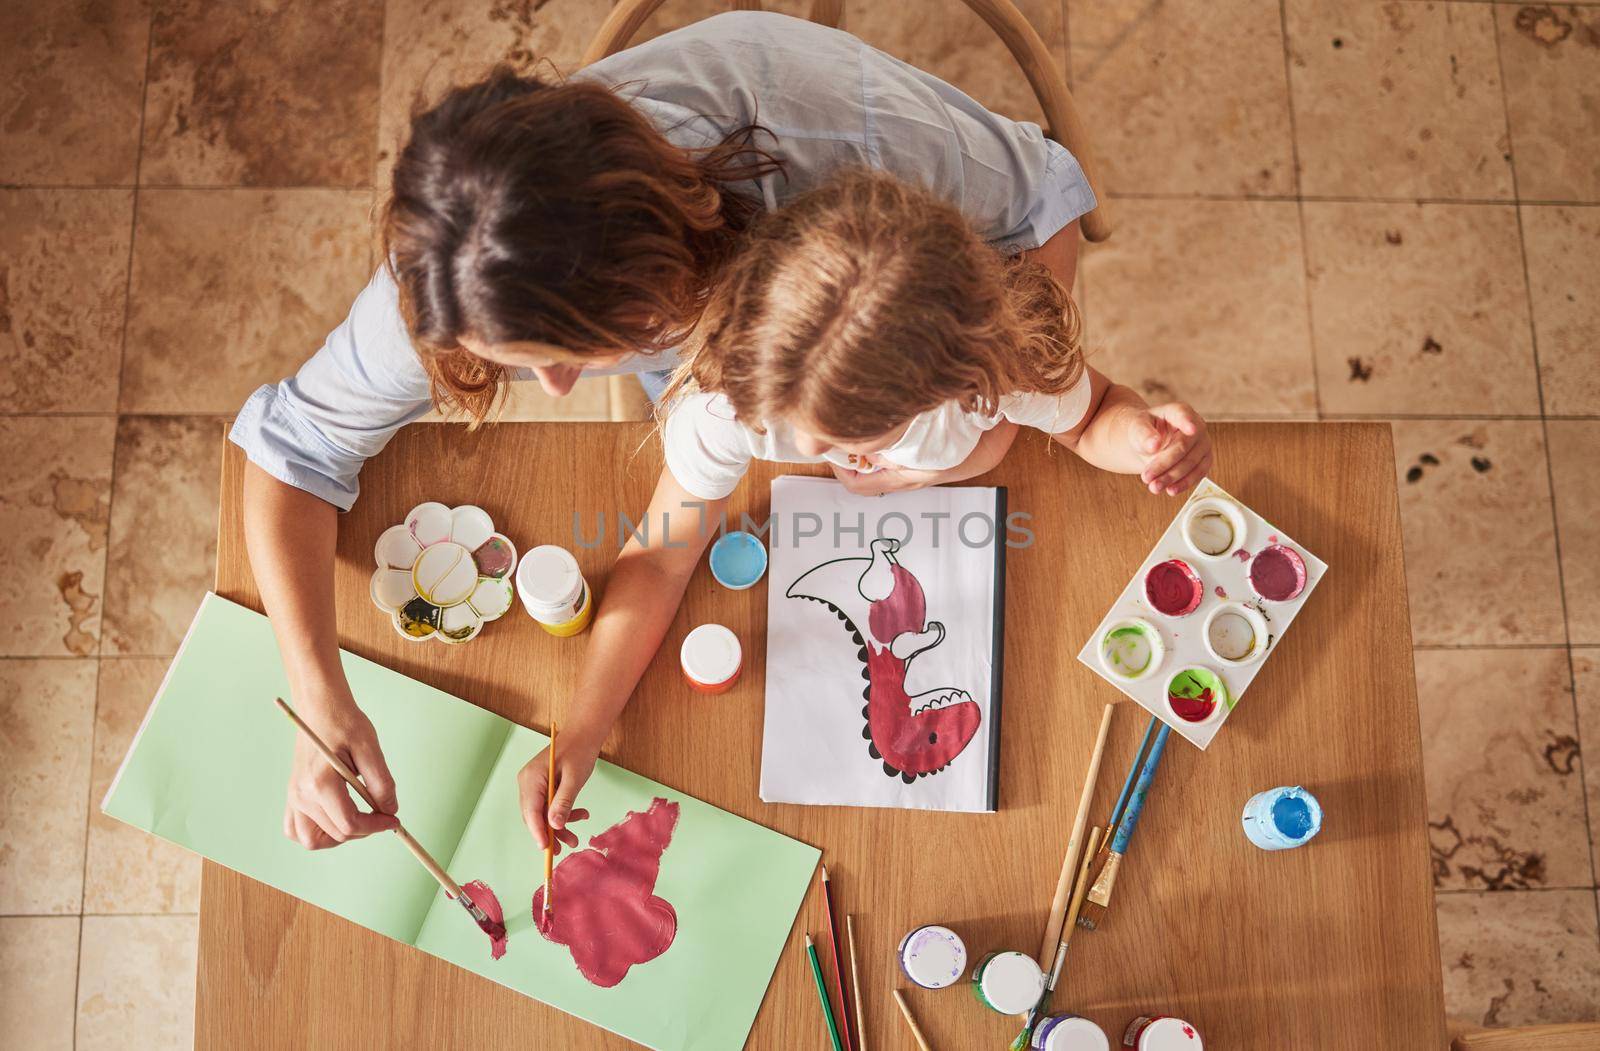 Top view, mother and child art painting in house studio, family home or creative space with brush, oil paint or books. Mom, parent or child hands bonding in abstract design or relax activity on table.